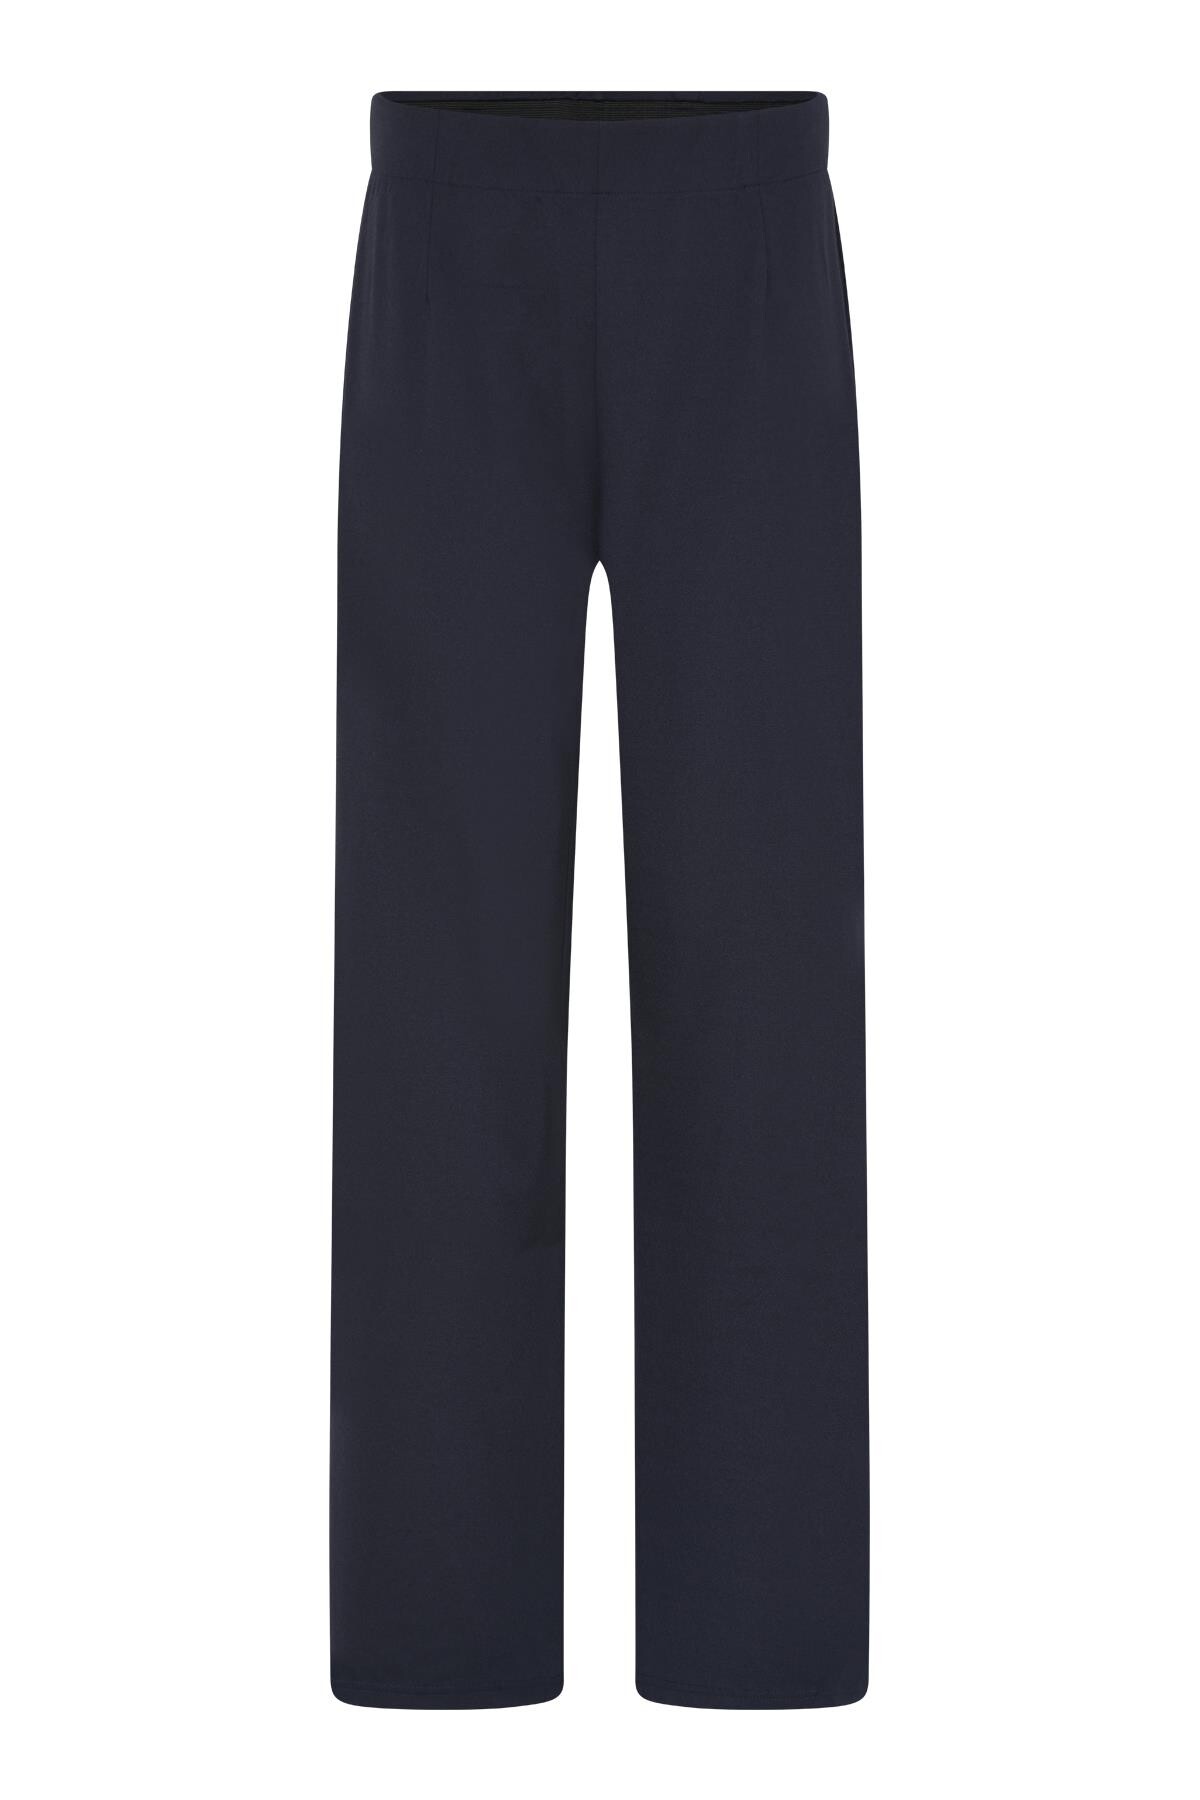 IN FRONT ISABEL PANTS 16059 591 (Navy 591)